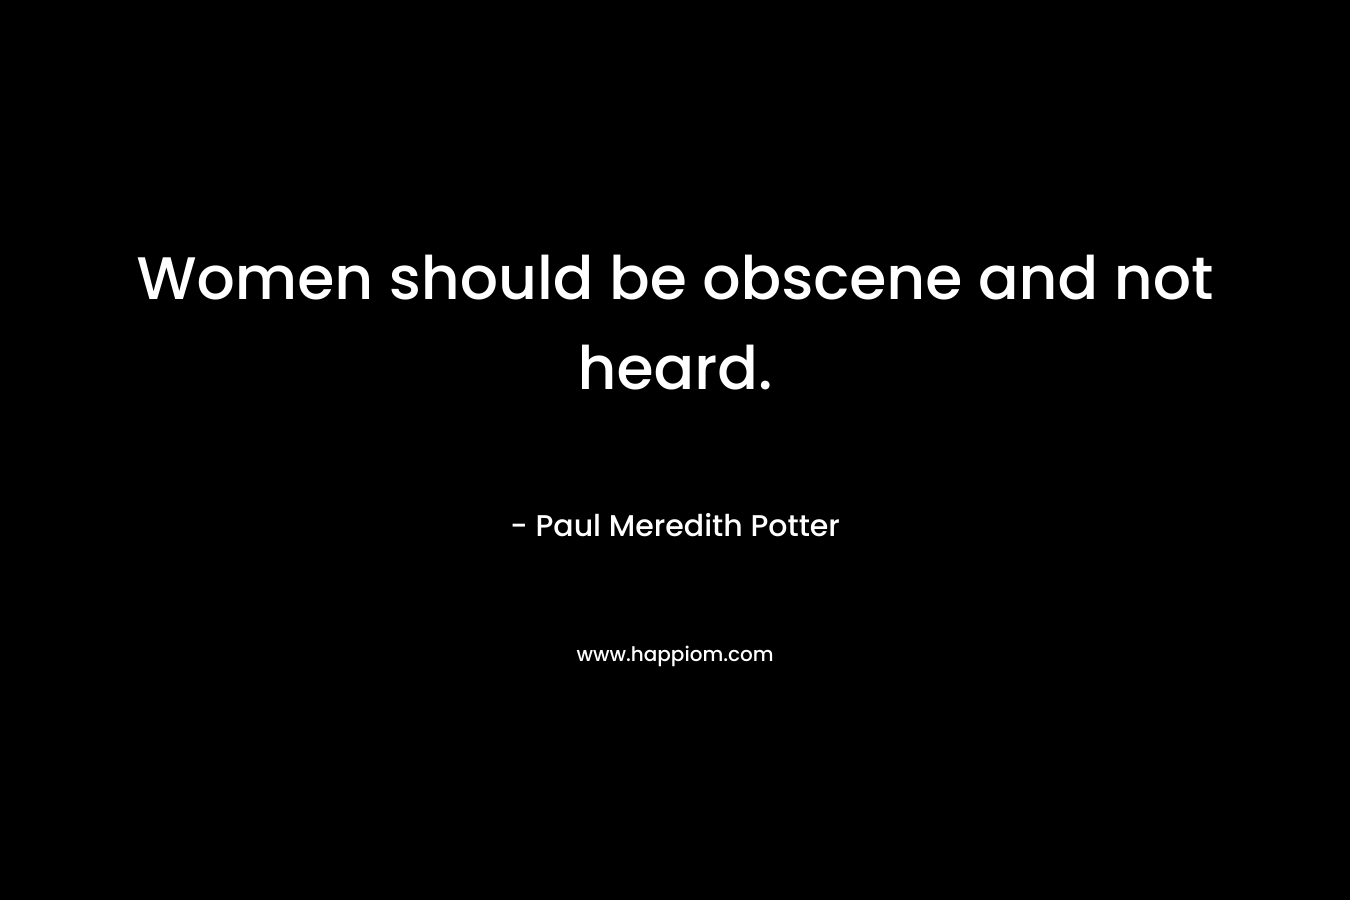 Women should be obscene and not heard. – Paul Meredith Potter